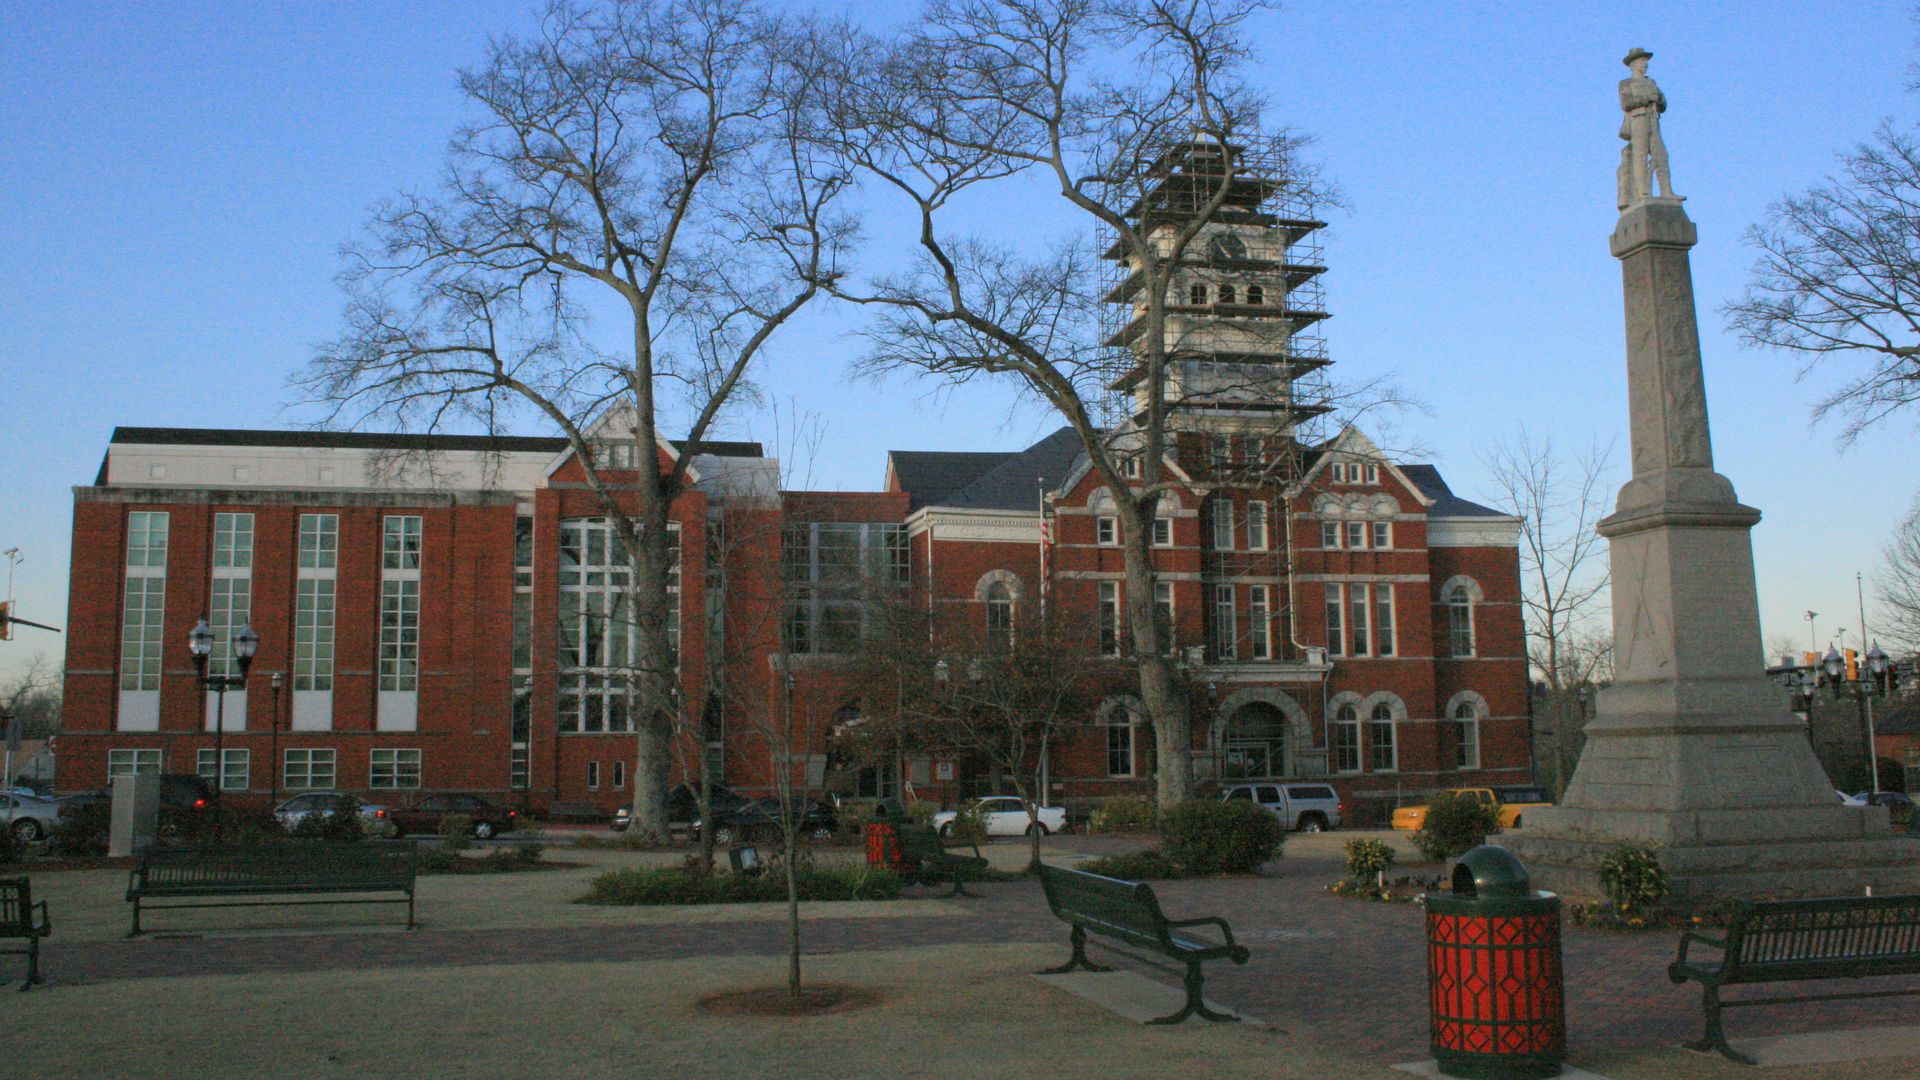 A photo of a tall Confederate monument with a man in a hat atop in a courthouse square